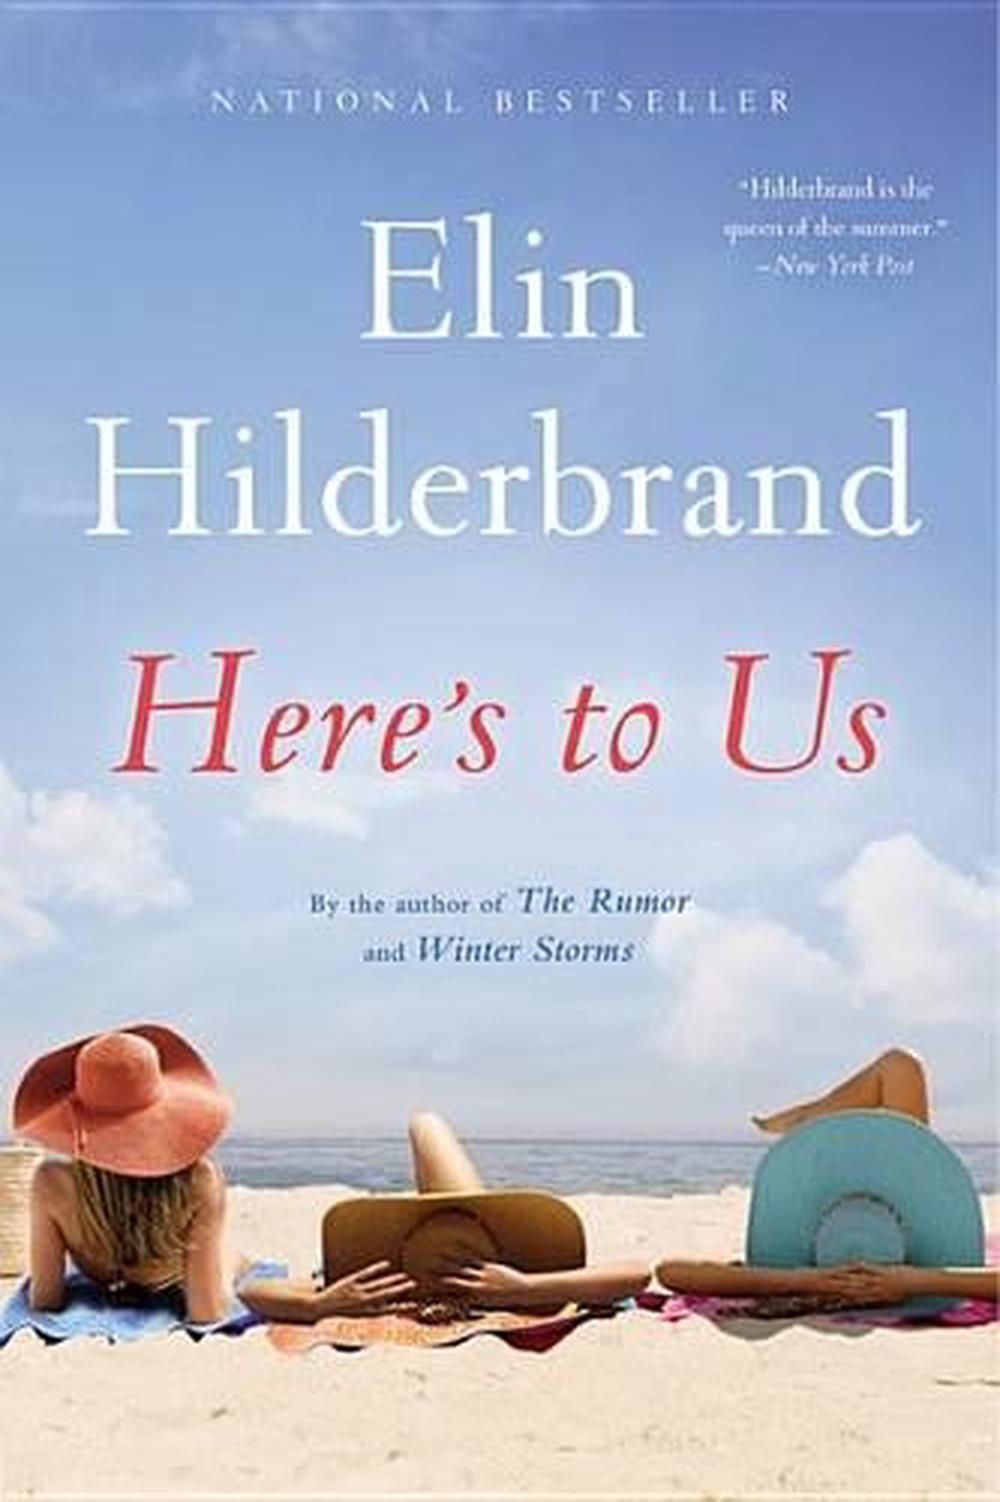 Here's to Us by Elin Hilderbrand (English) Paperback Book Free Shipping